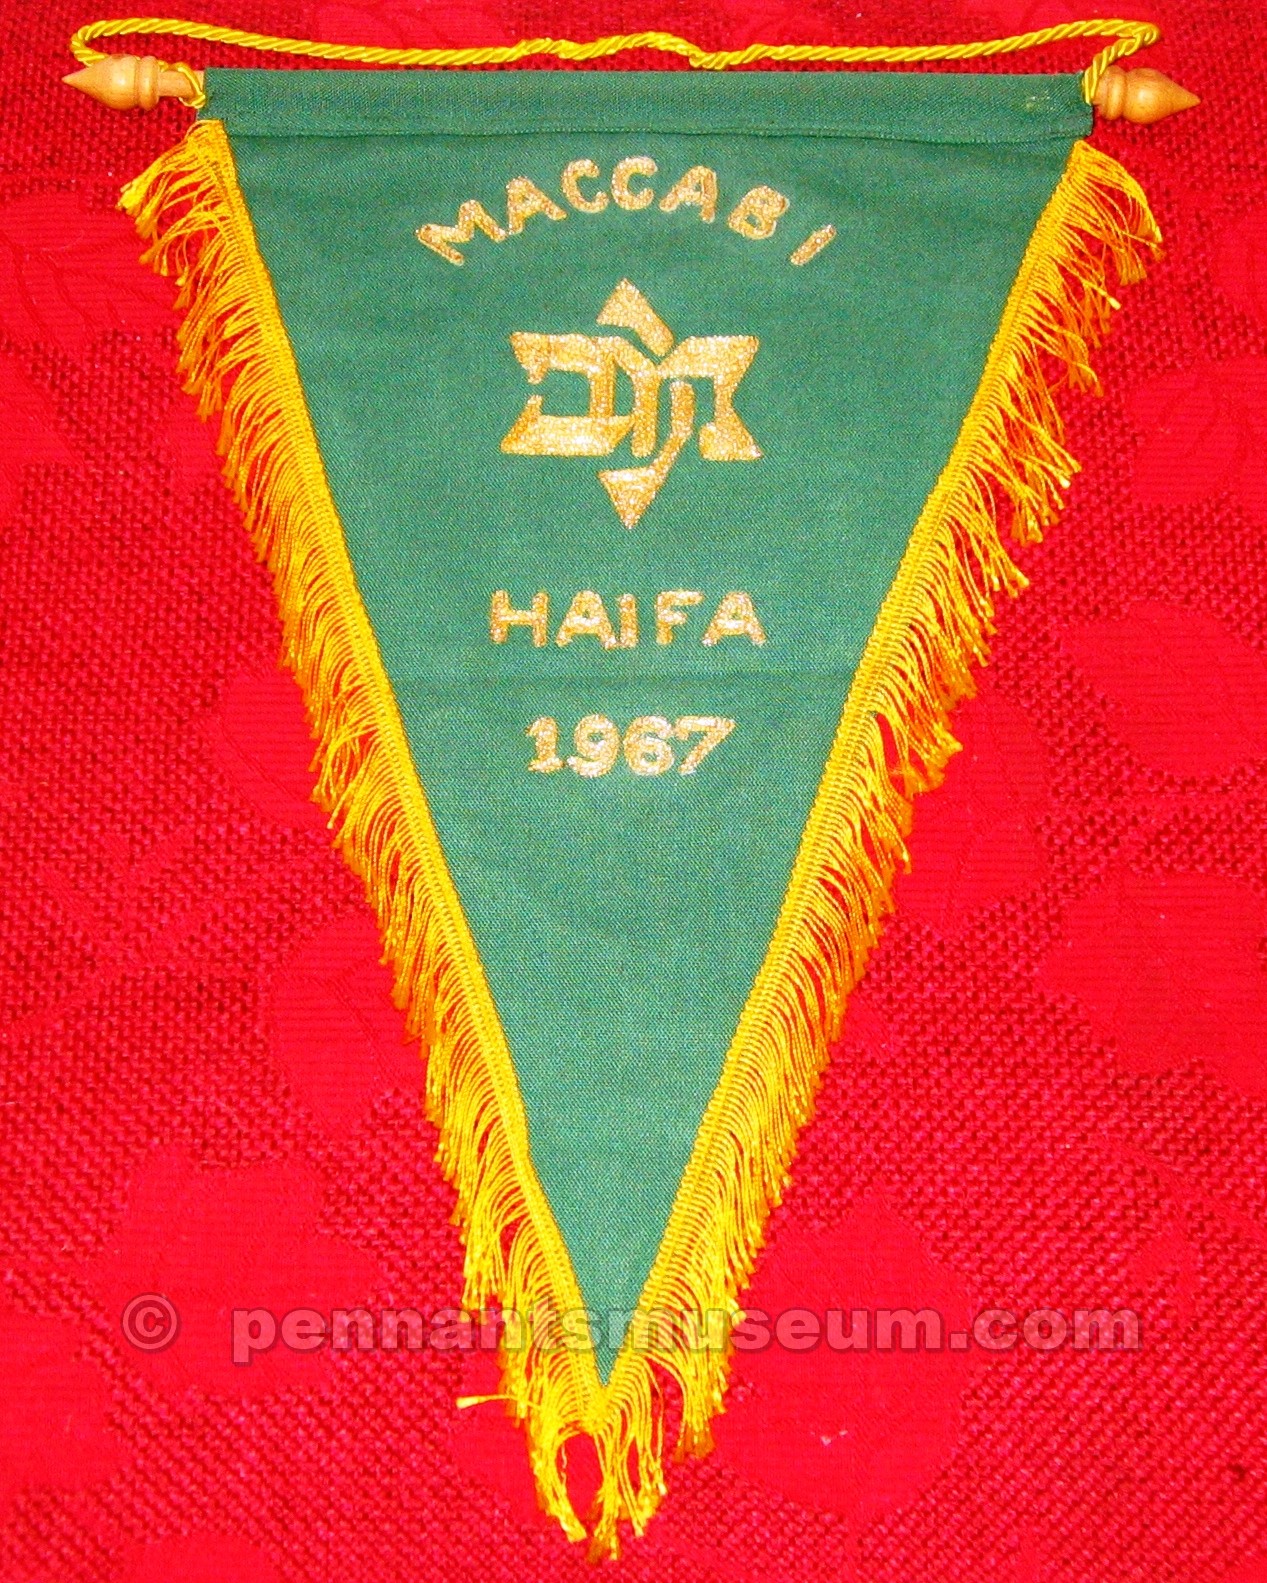 ISRAEL - a football soccer pennants collection by Marco Cianfanelli